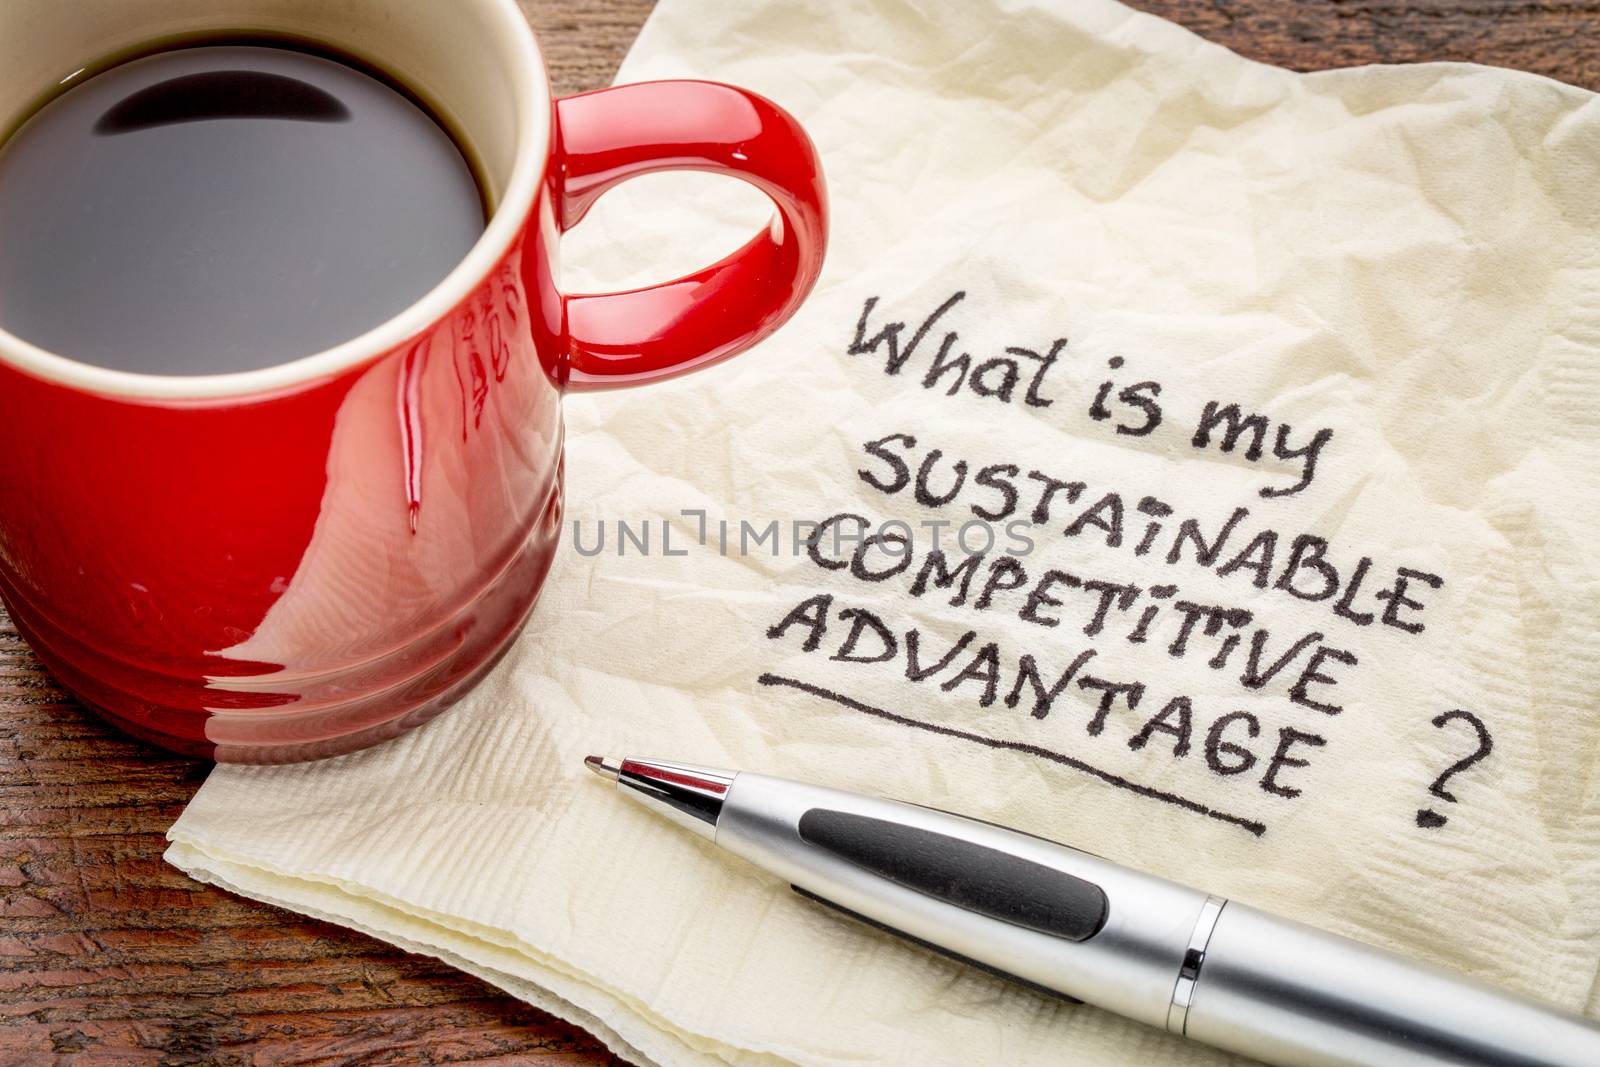 What is my sustainable competitive advantage question - handwriting on a napkin with a cup of coffee